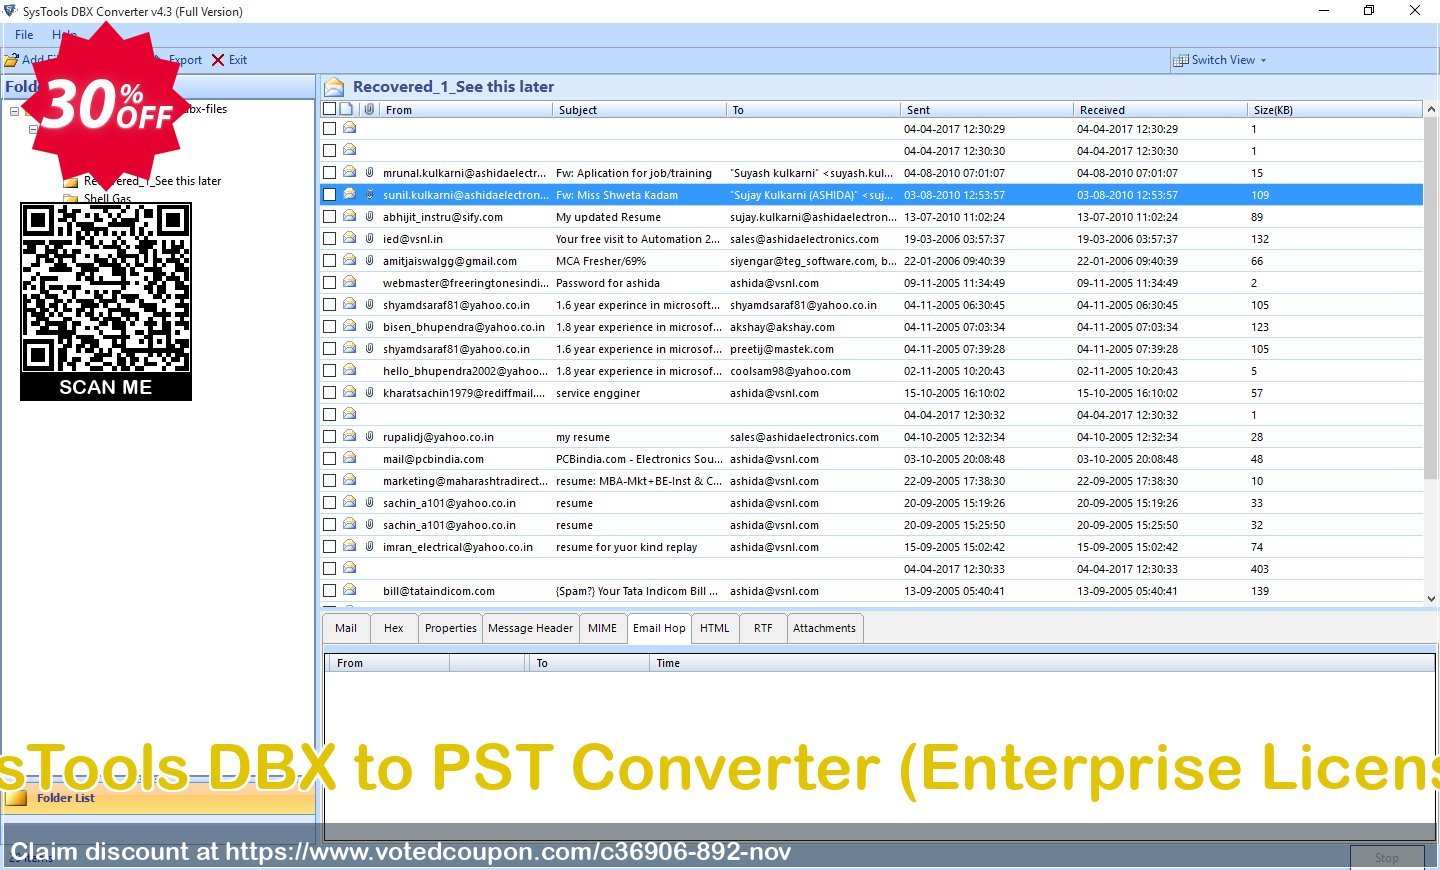 SysTools DBX to PST Converter, Enterprise Plan  Coupon, discount SysTools coupon 36906. Promotion: SysTools promotion codes 36906